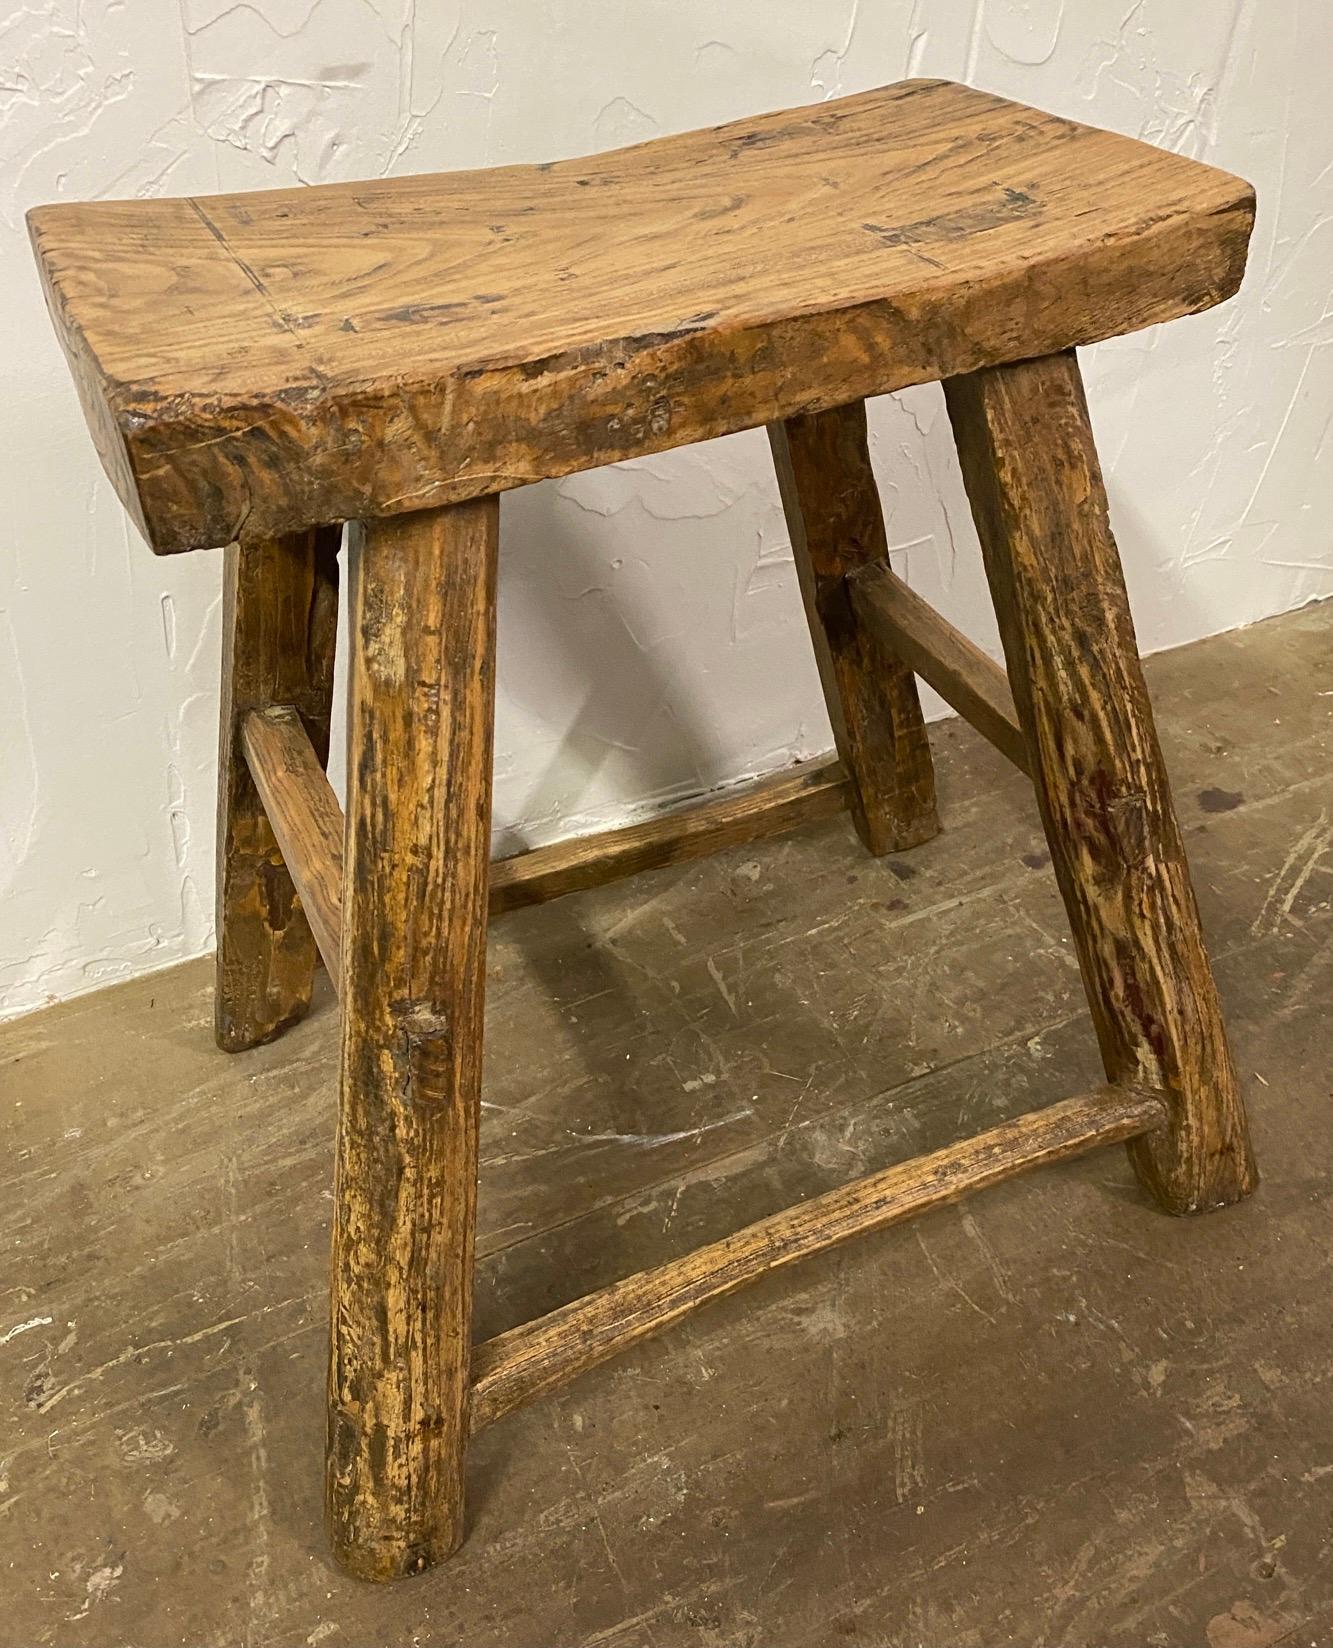 Dated to the early 20th century, this rustic stool has simple splayed-leg design and well-worn finish. Crafted of northern elm wood with mortise-and-tenon joinery, without the use of nails or screws, the stool features a rectangular seat and four